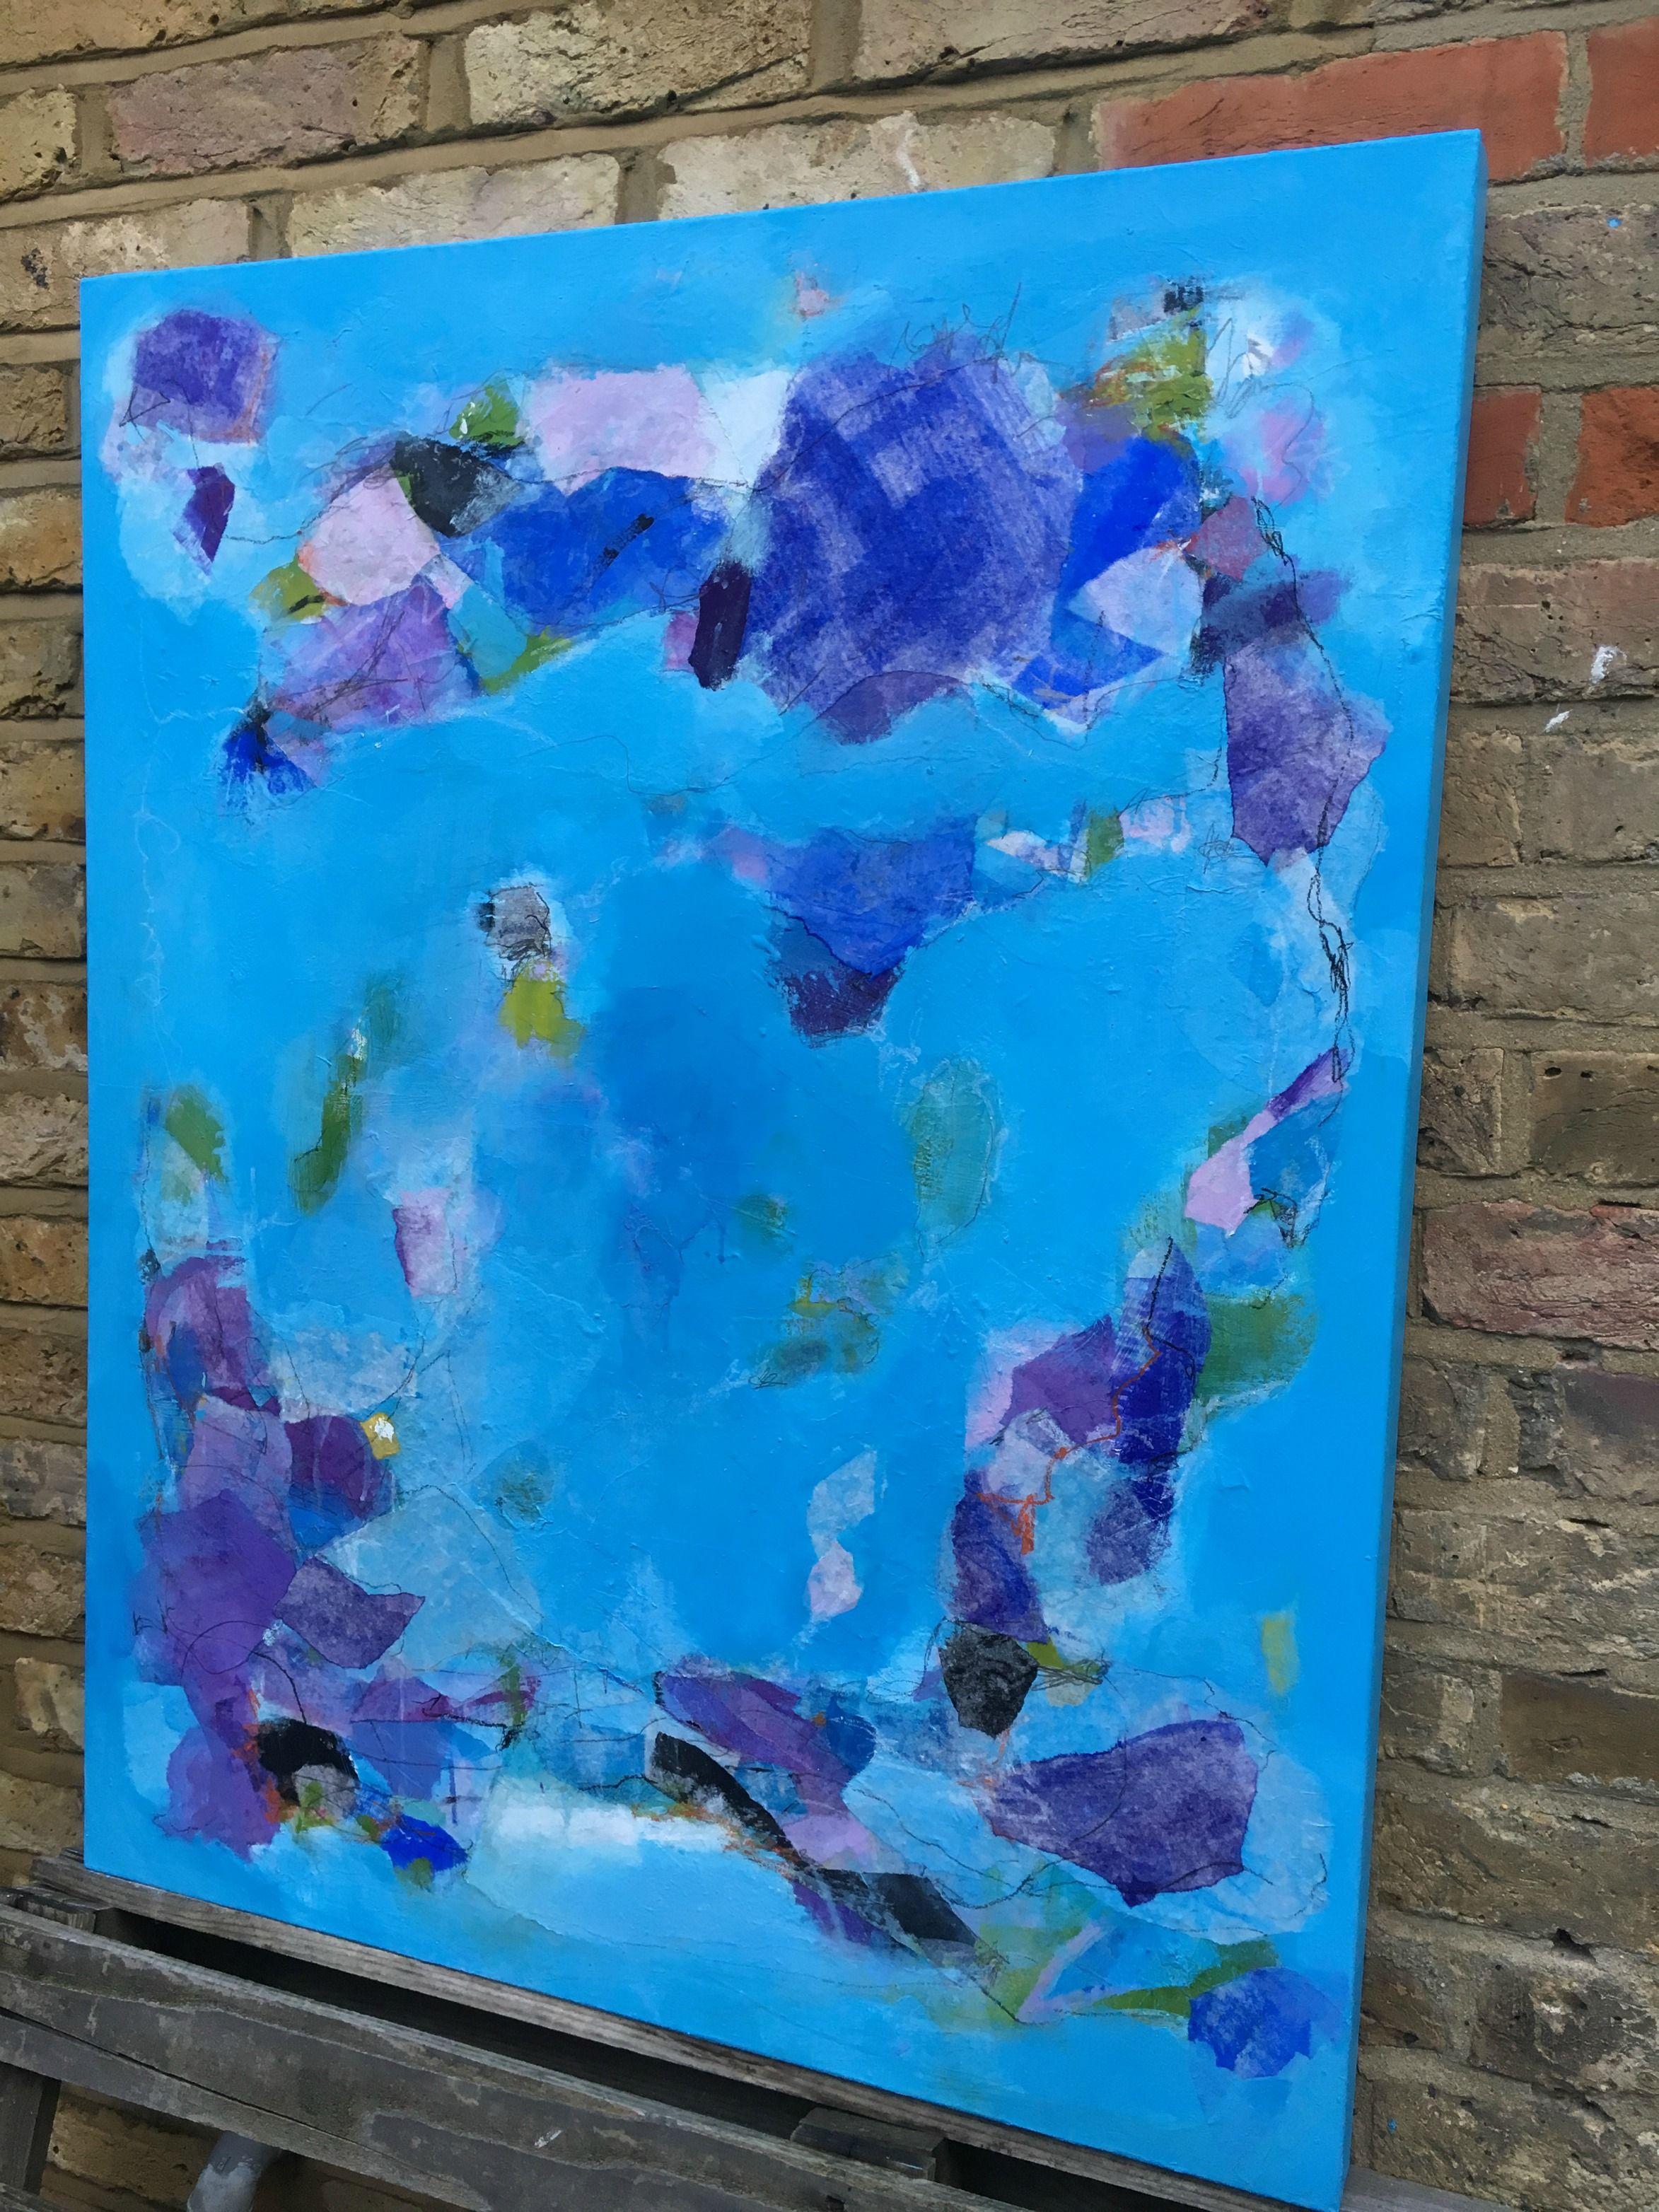 In this painting I explore the idea of memories drifting in and out of awareness, floating in our interior sea. I enjoyed playing with shapes, values and colour in relationship to each other painting layer over layer until I felt the painting was